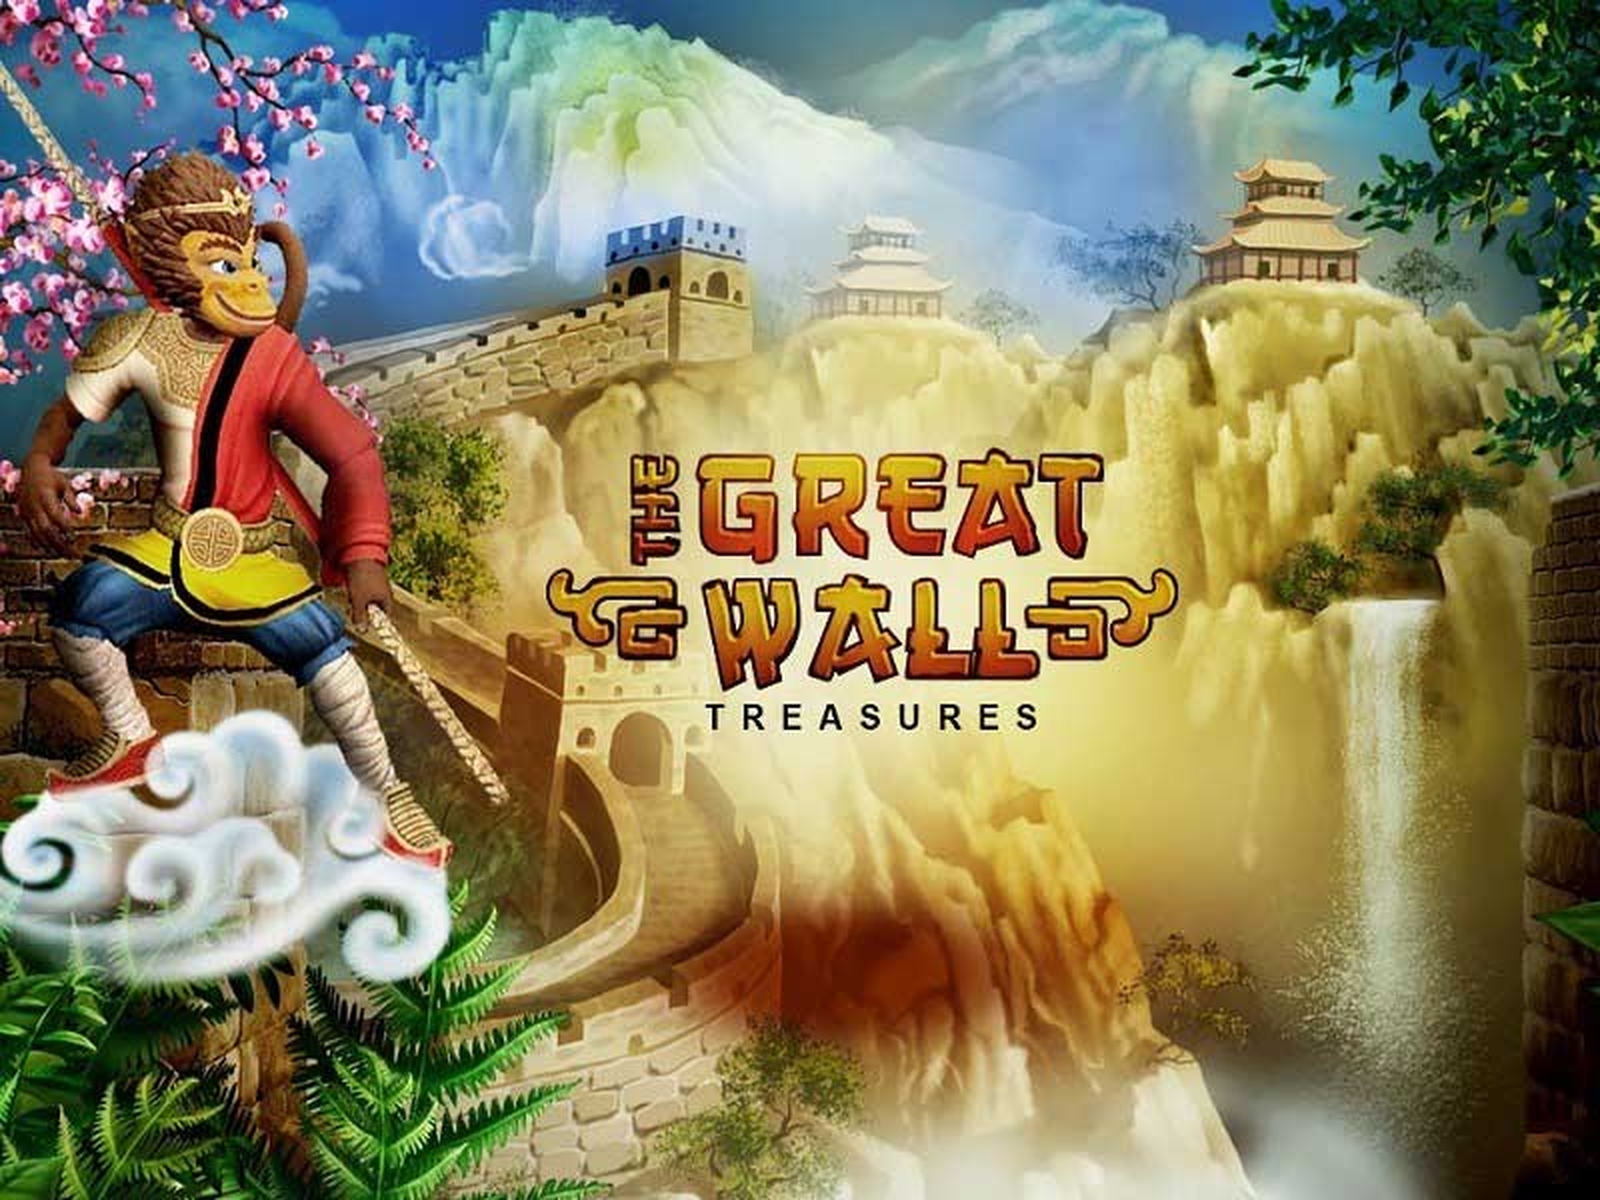 The The Great Wall Treasure Online Slot Demo Game by Evoplay Entertainment